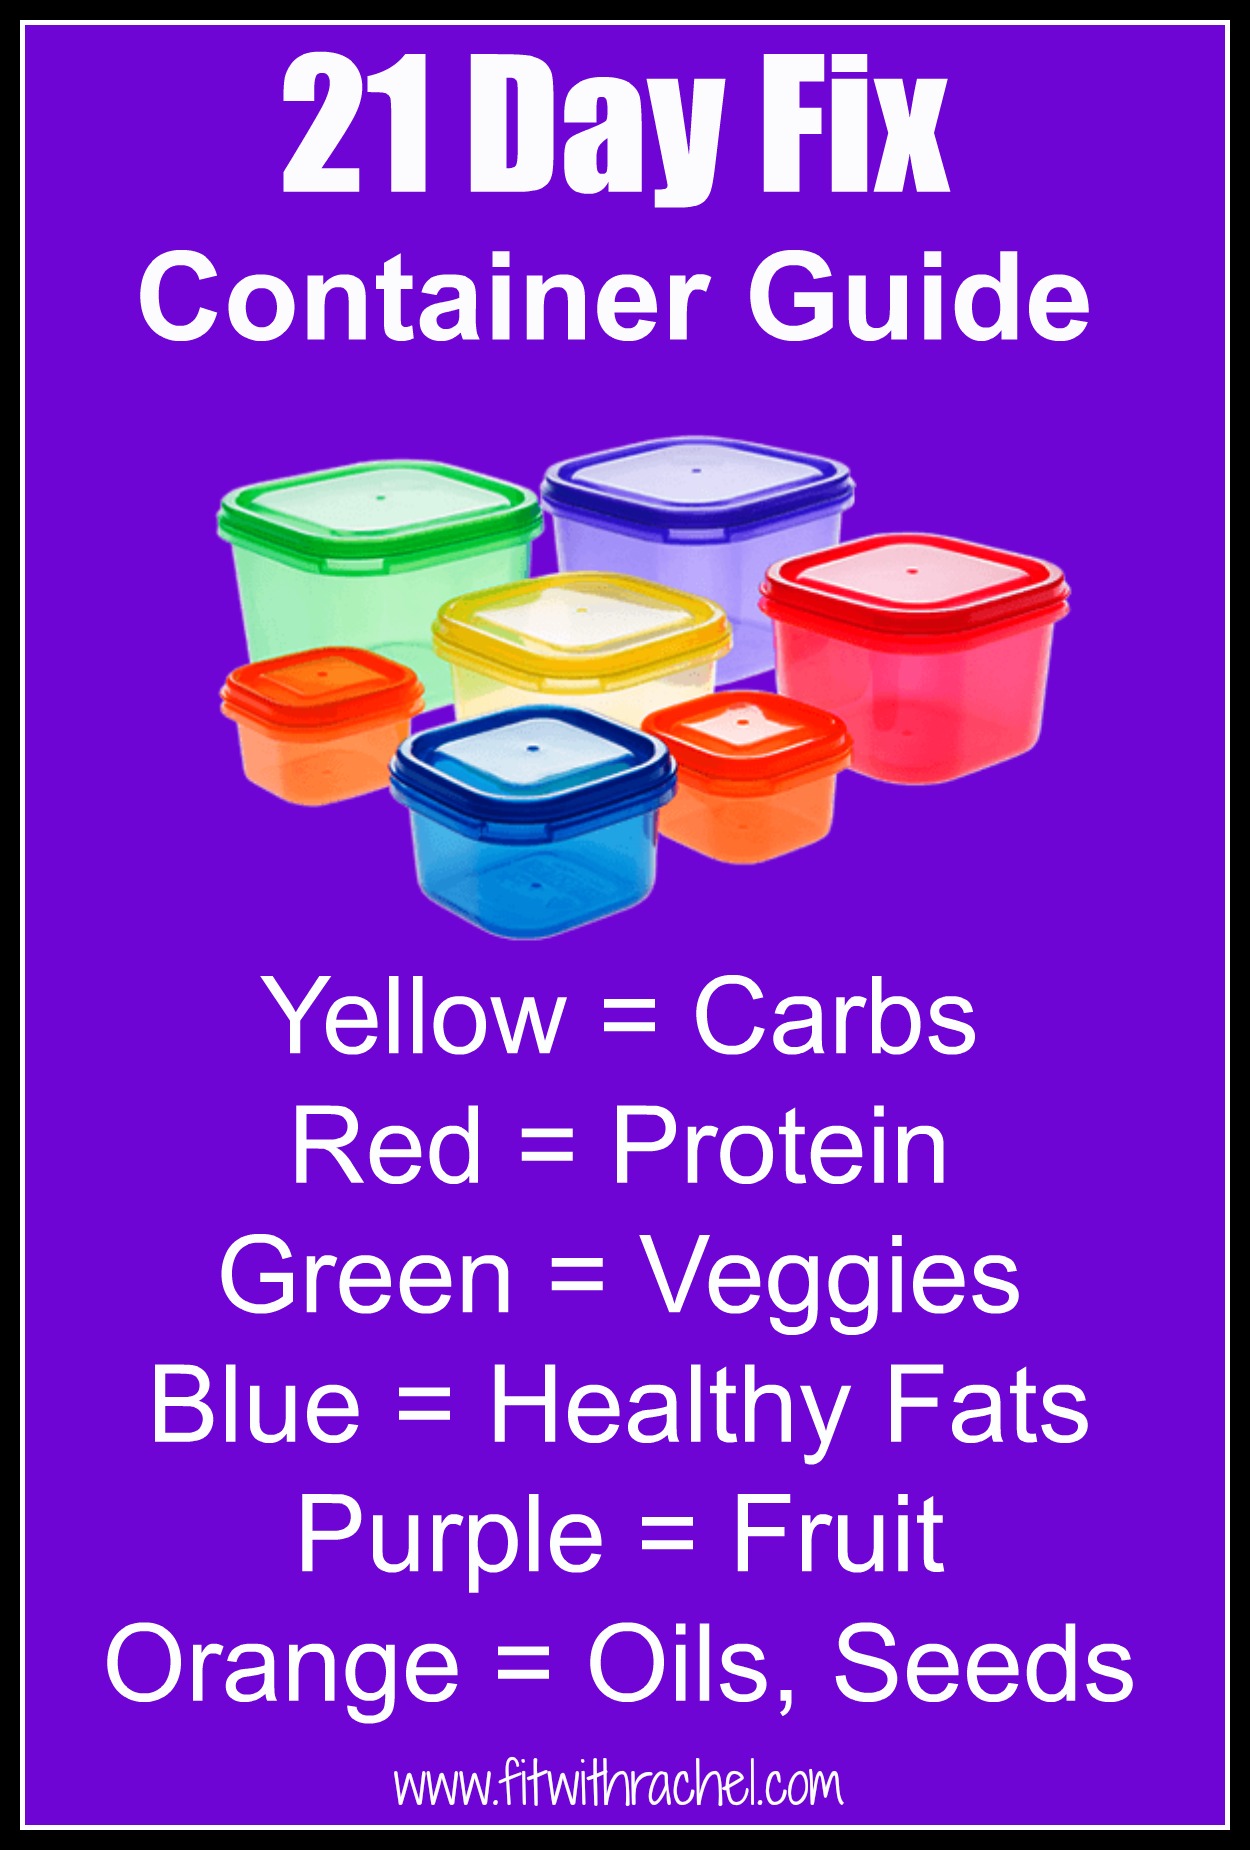 21 day fix container guide